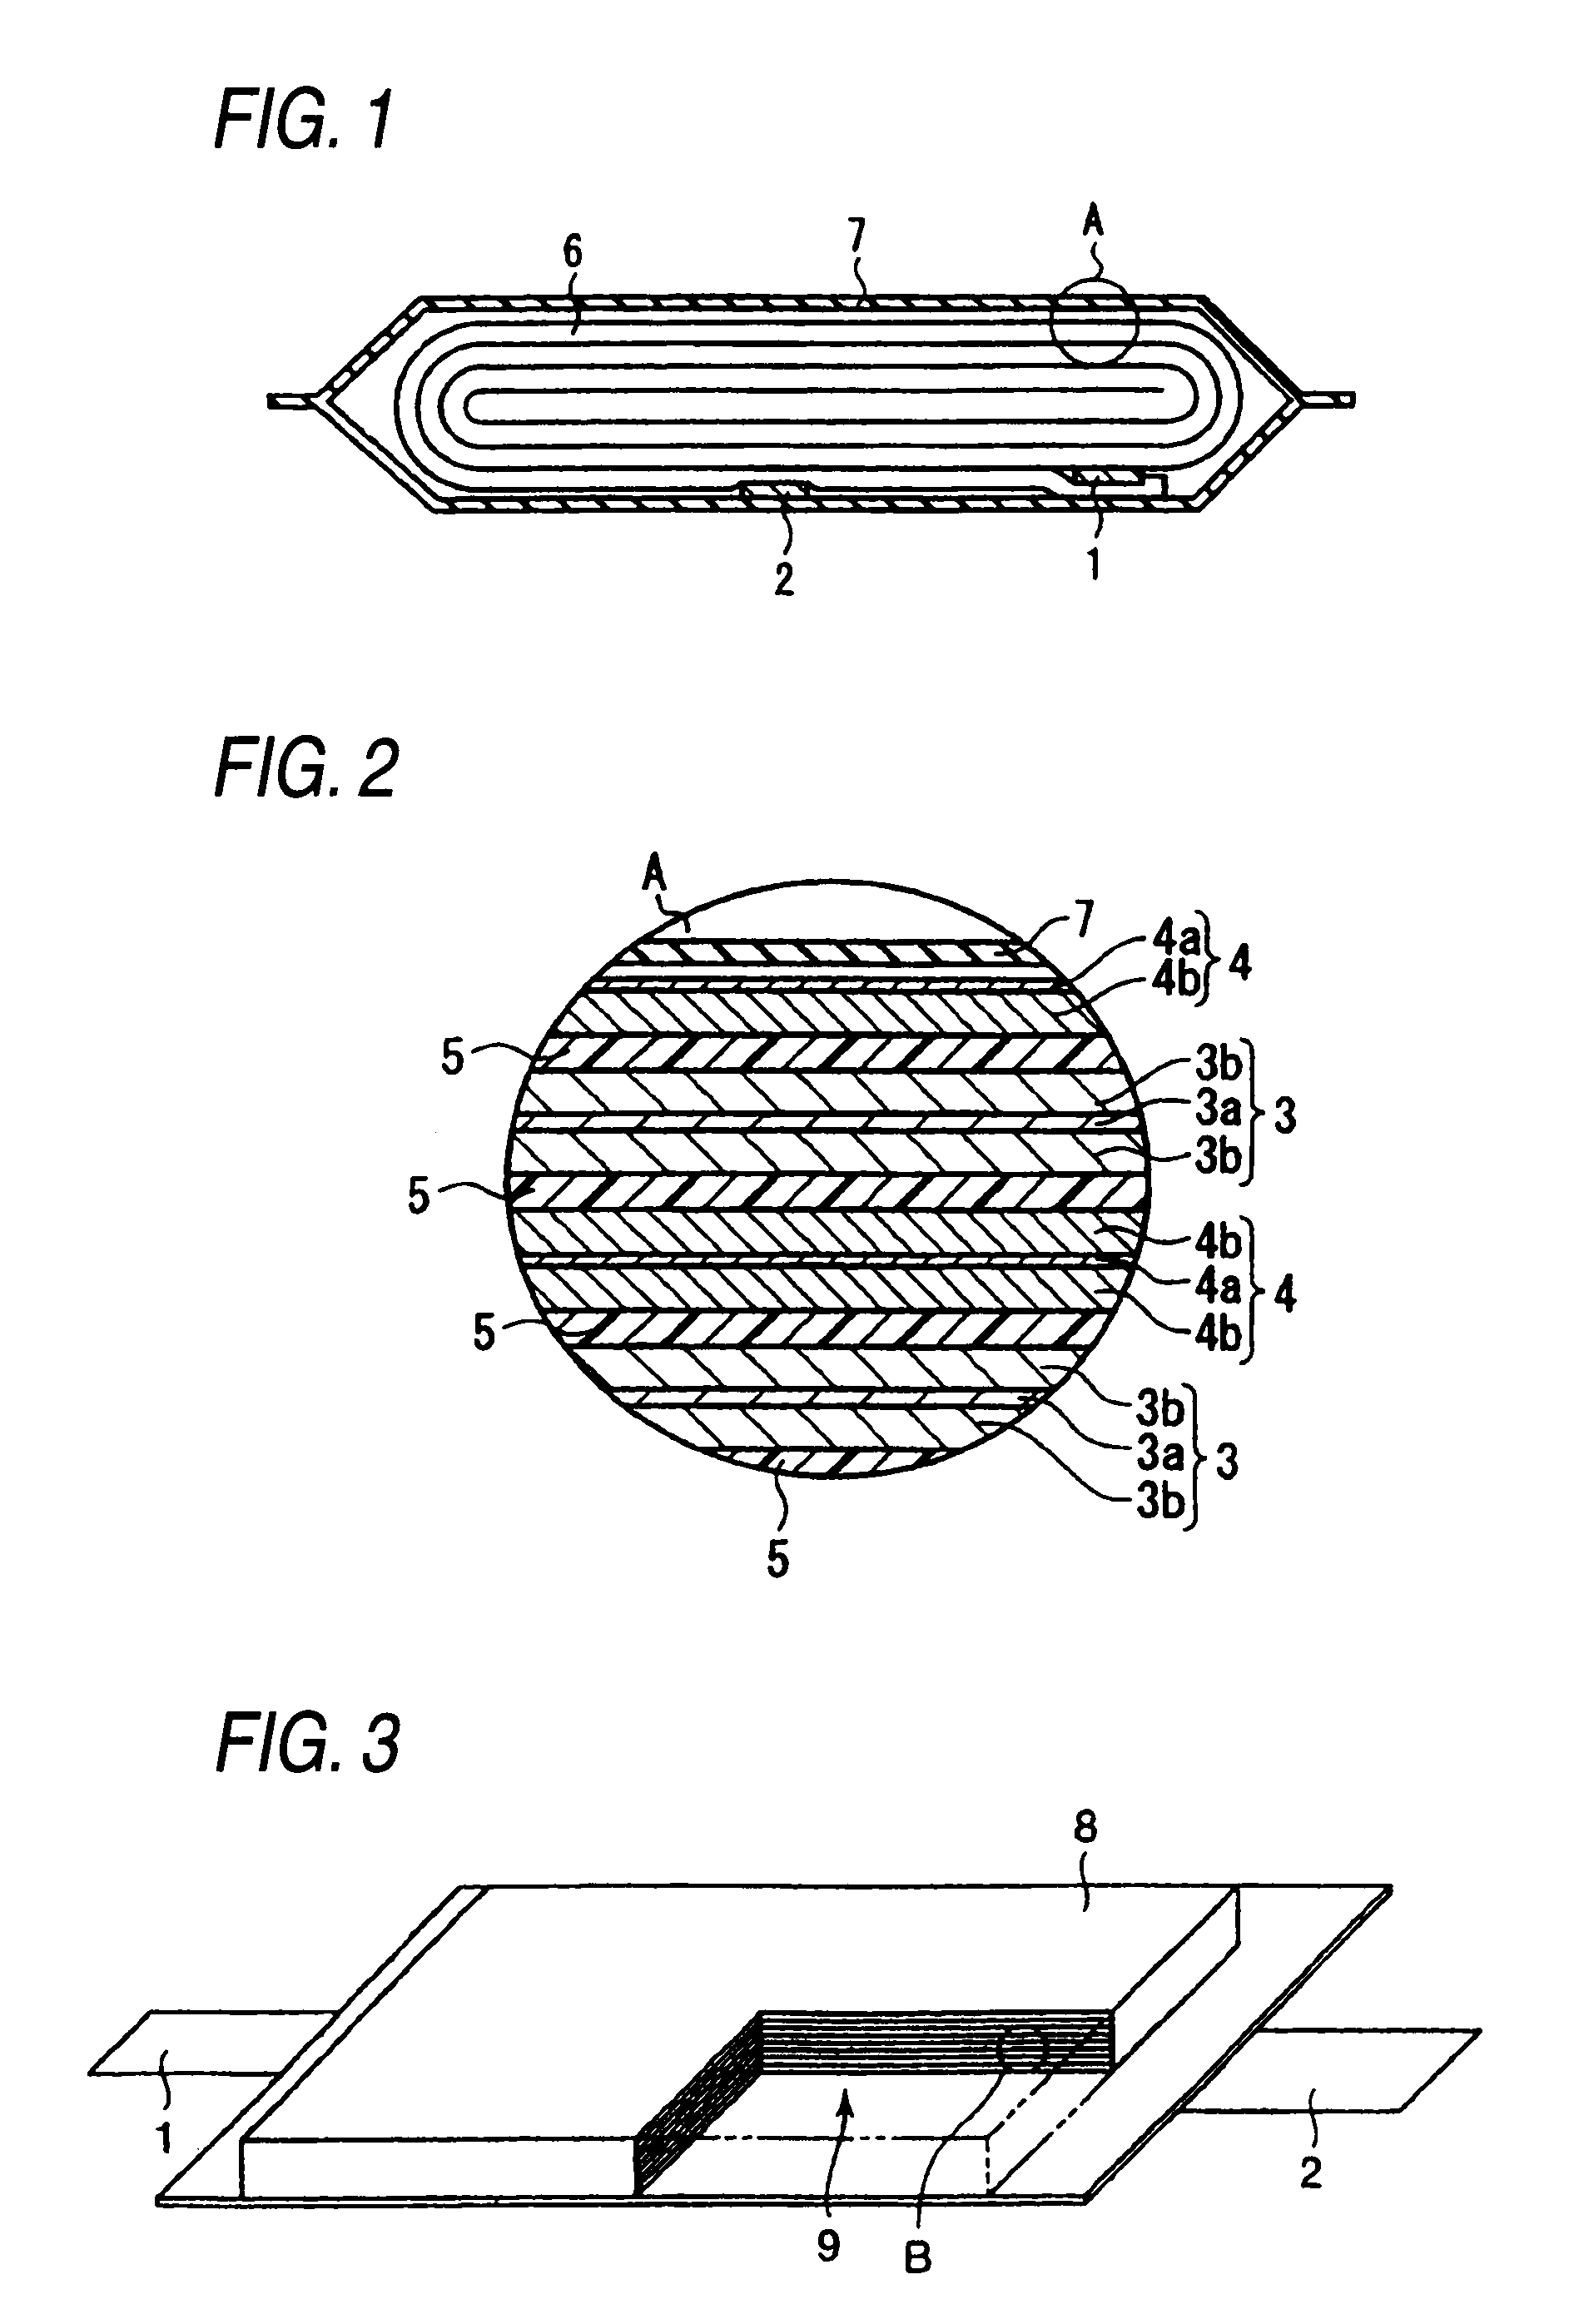 Nonaqueous-electrolyte battery containing a negative electrode with a coating film formed by an isocyanate-containing compound in the nonaqueous electrolyte